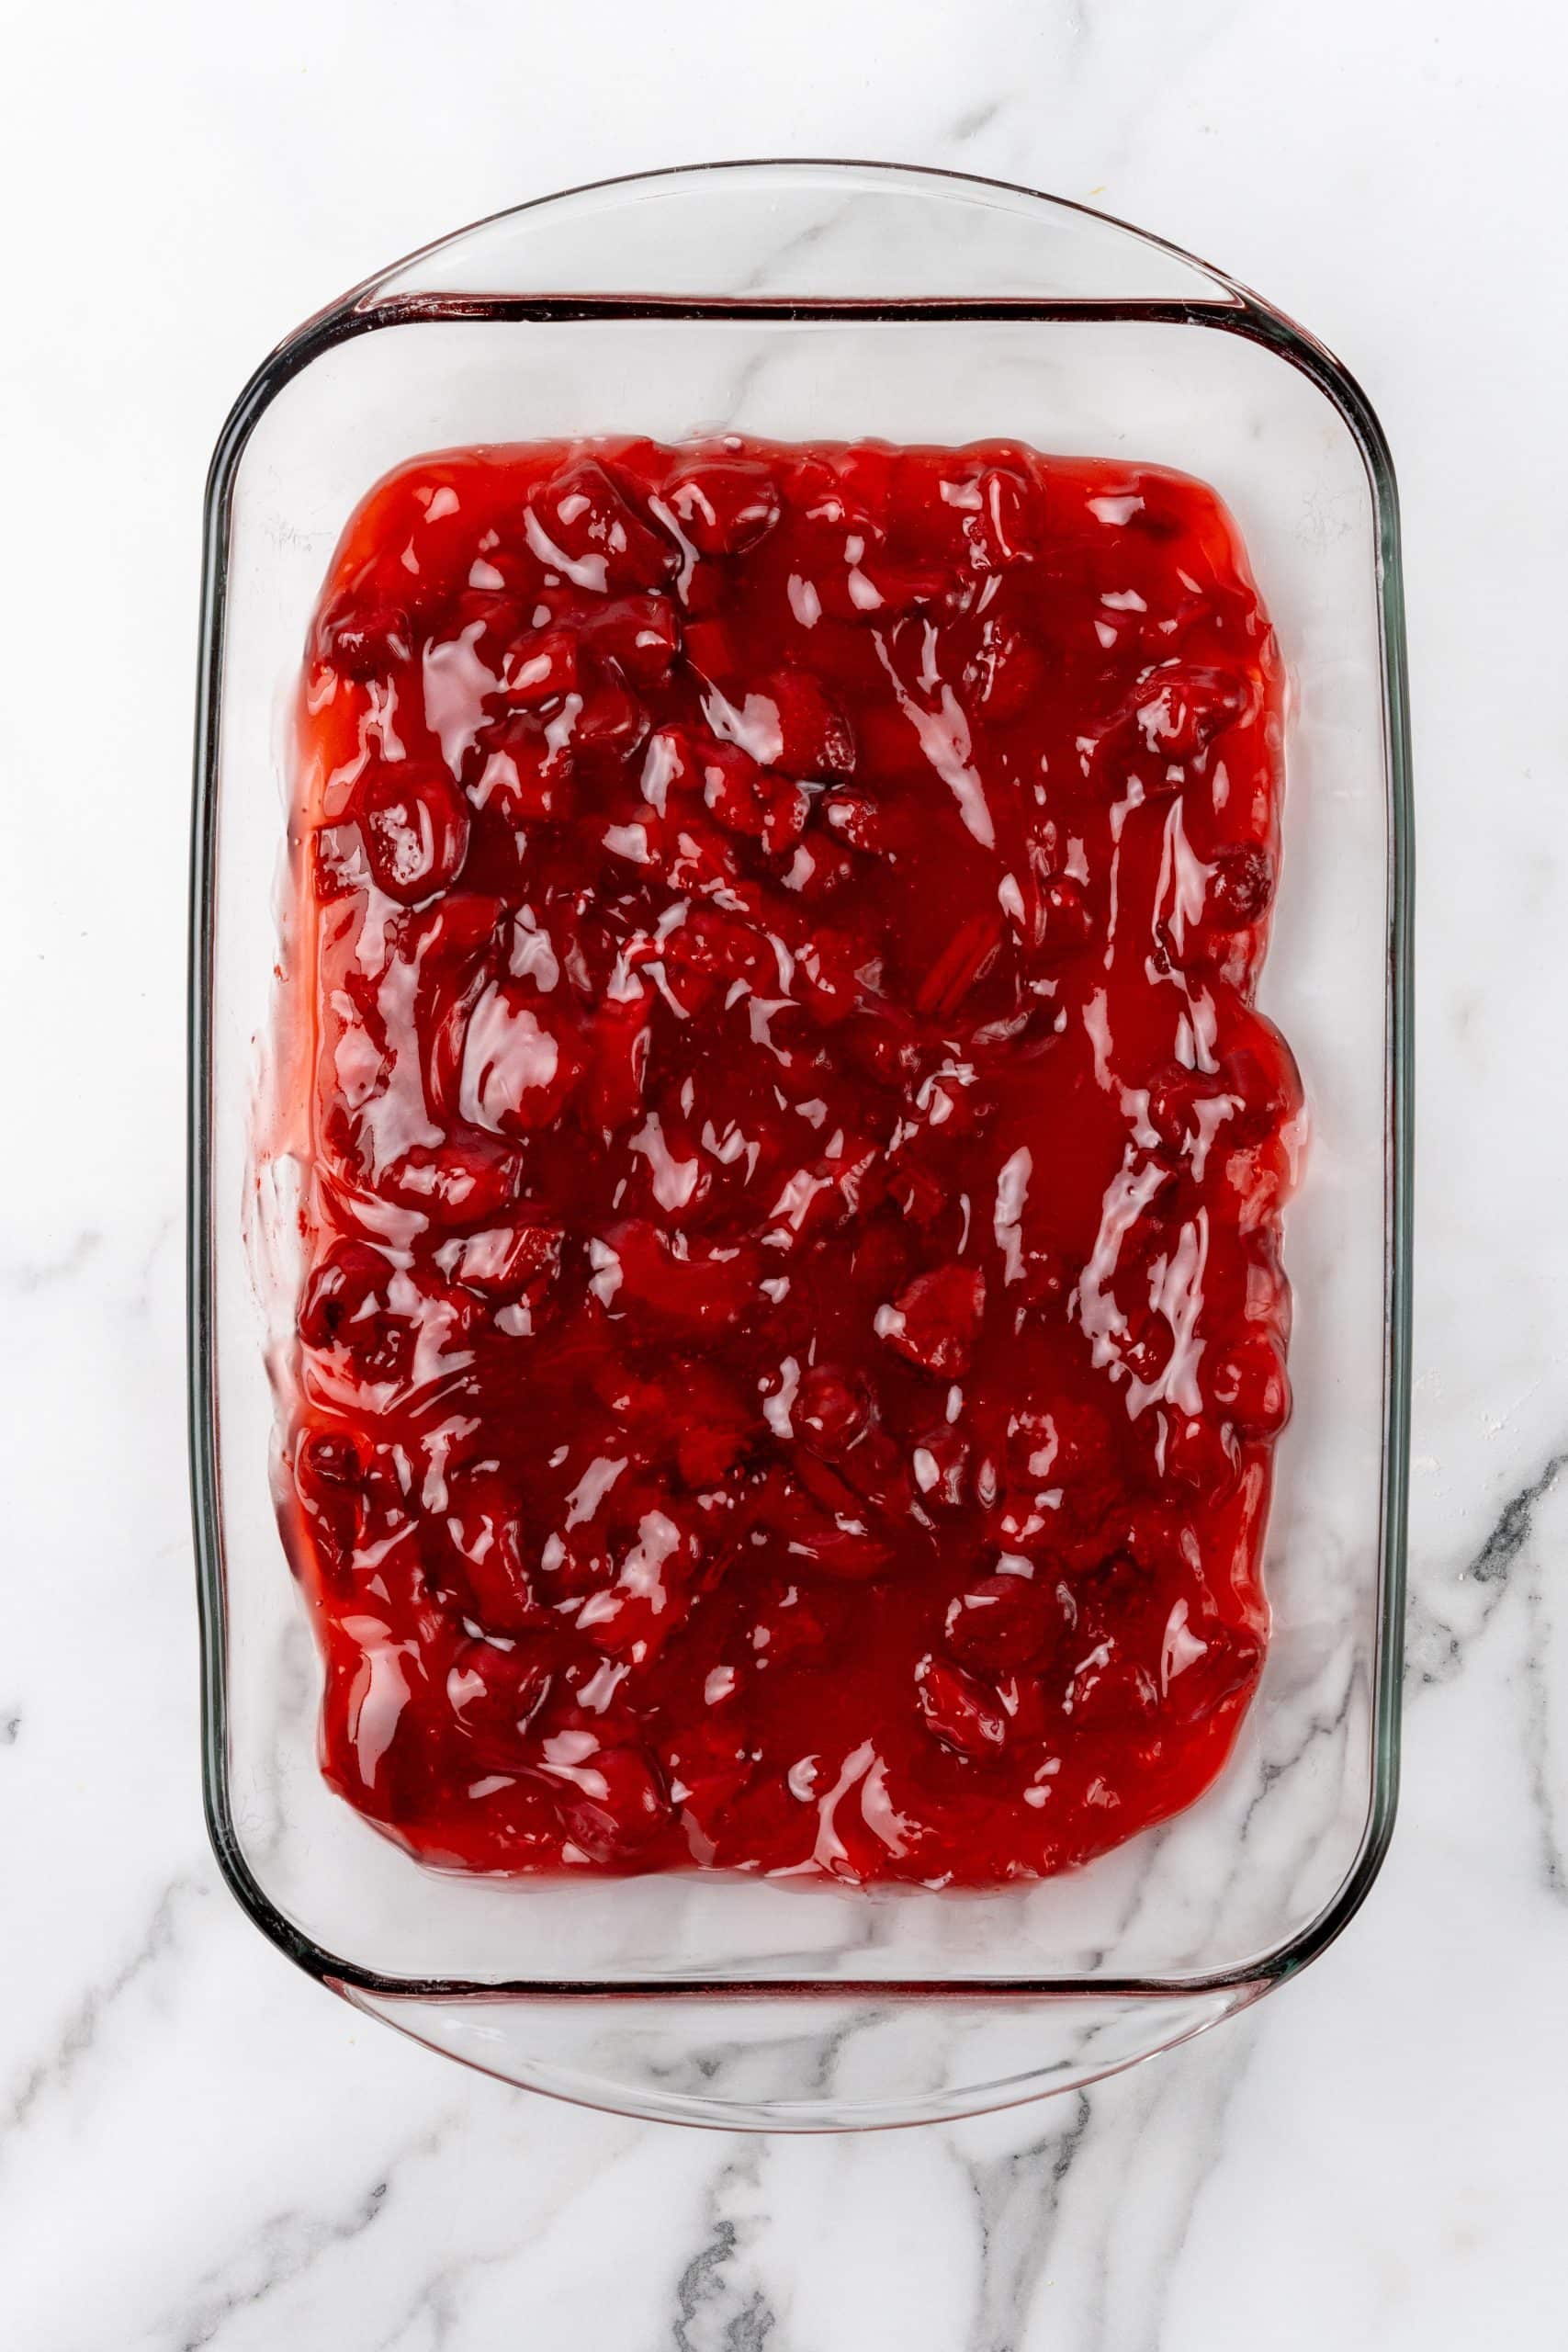 strawberry pie filling spread in a large glass baking dish